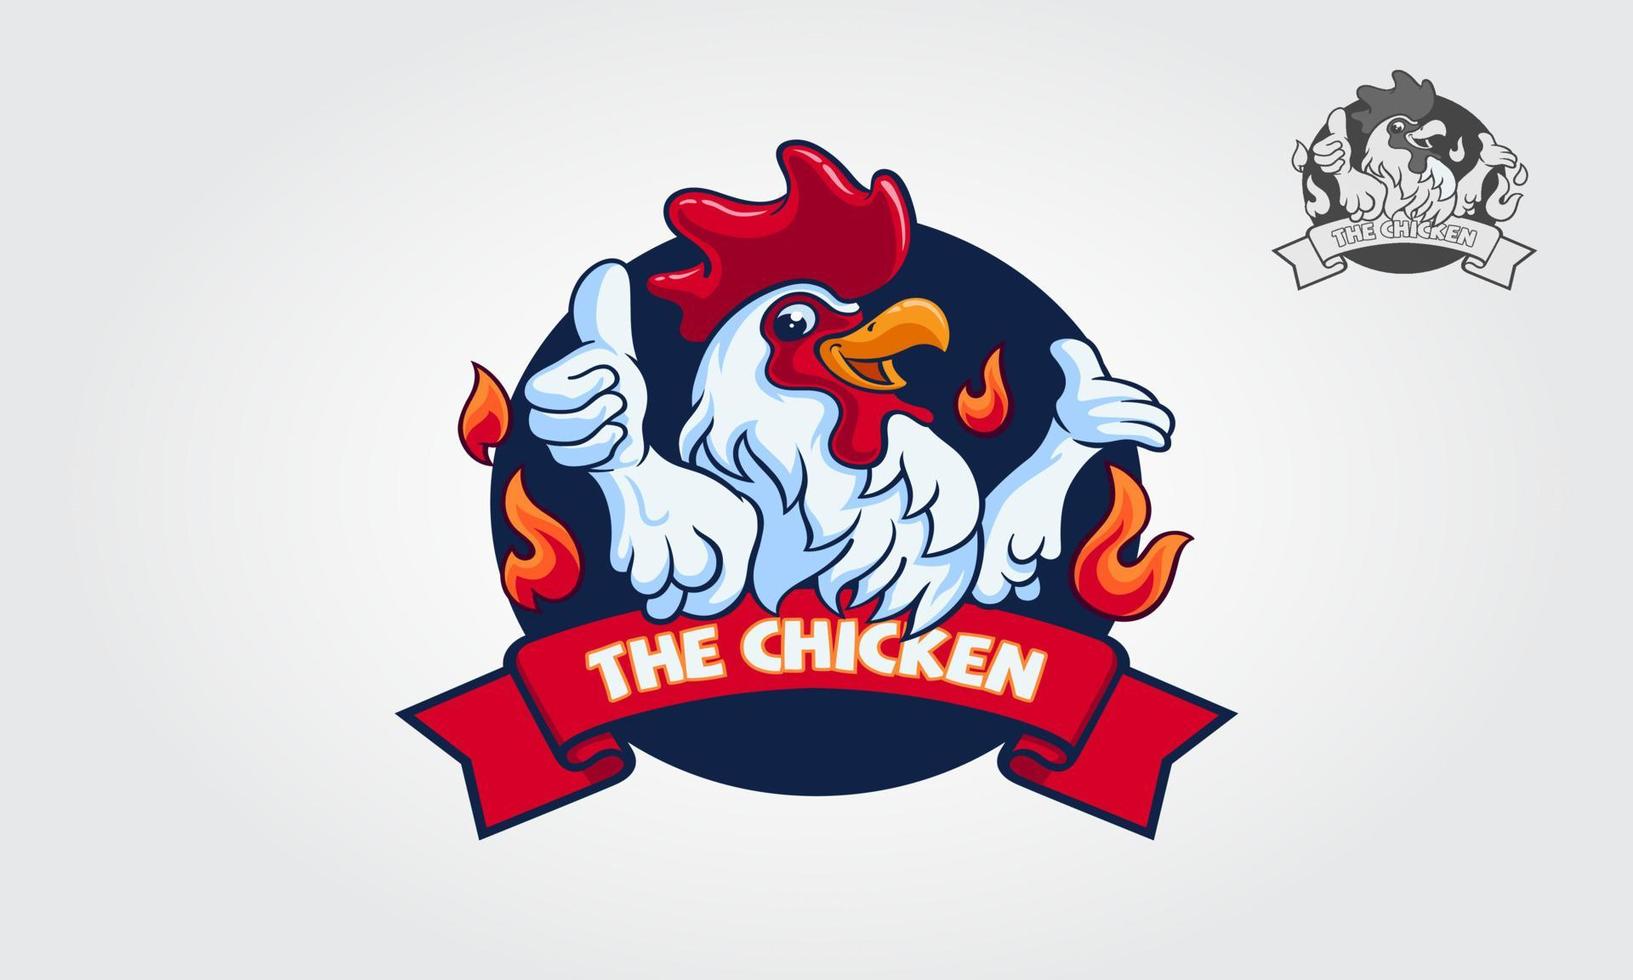 The Chicken logo illustration. This logo template suitable for businesses, product names, restaurants serving chicken dishes, or can also be used for modern chicken farming business. vector